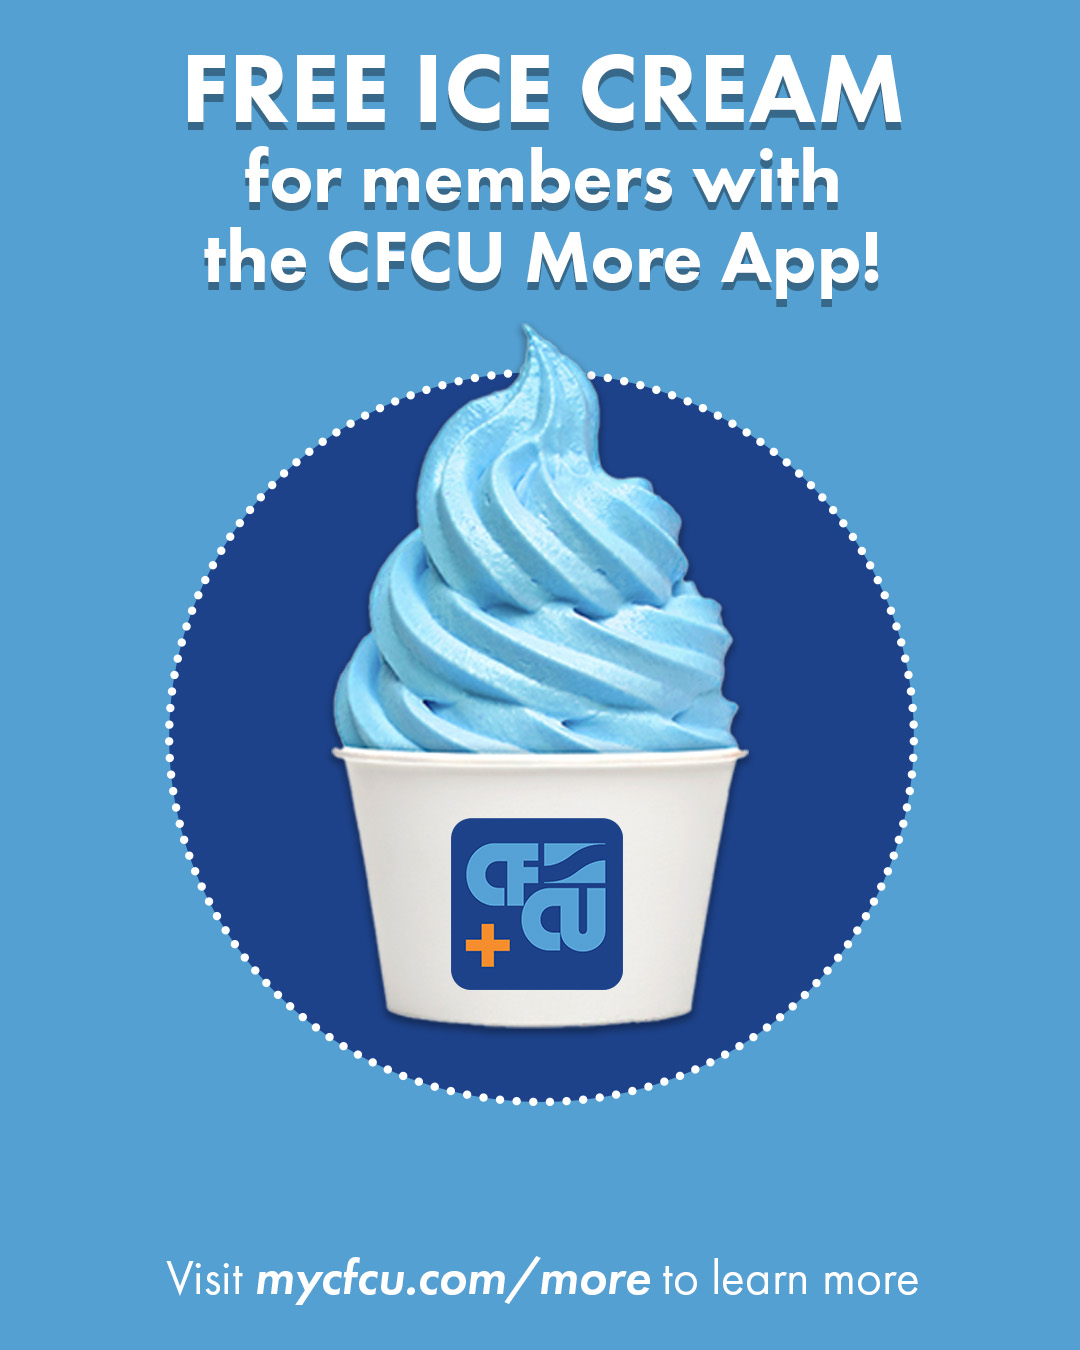 Free Ice Cream for members with the CFCU More App! Visit mycfcu.com/more to learn more